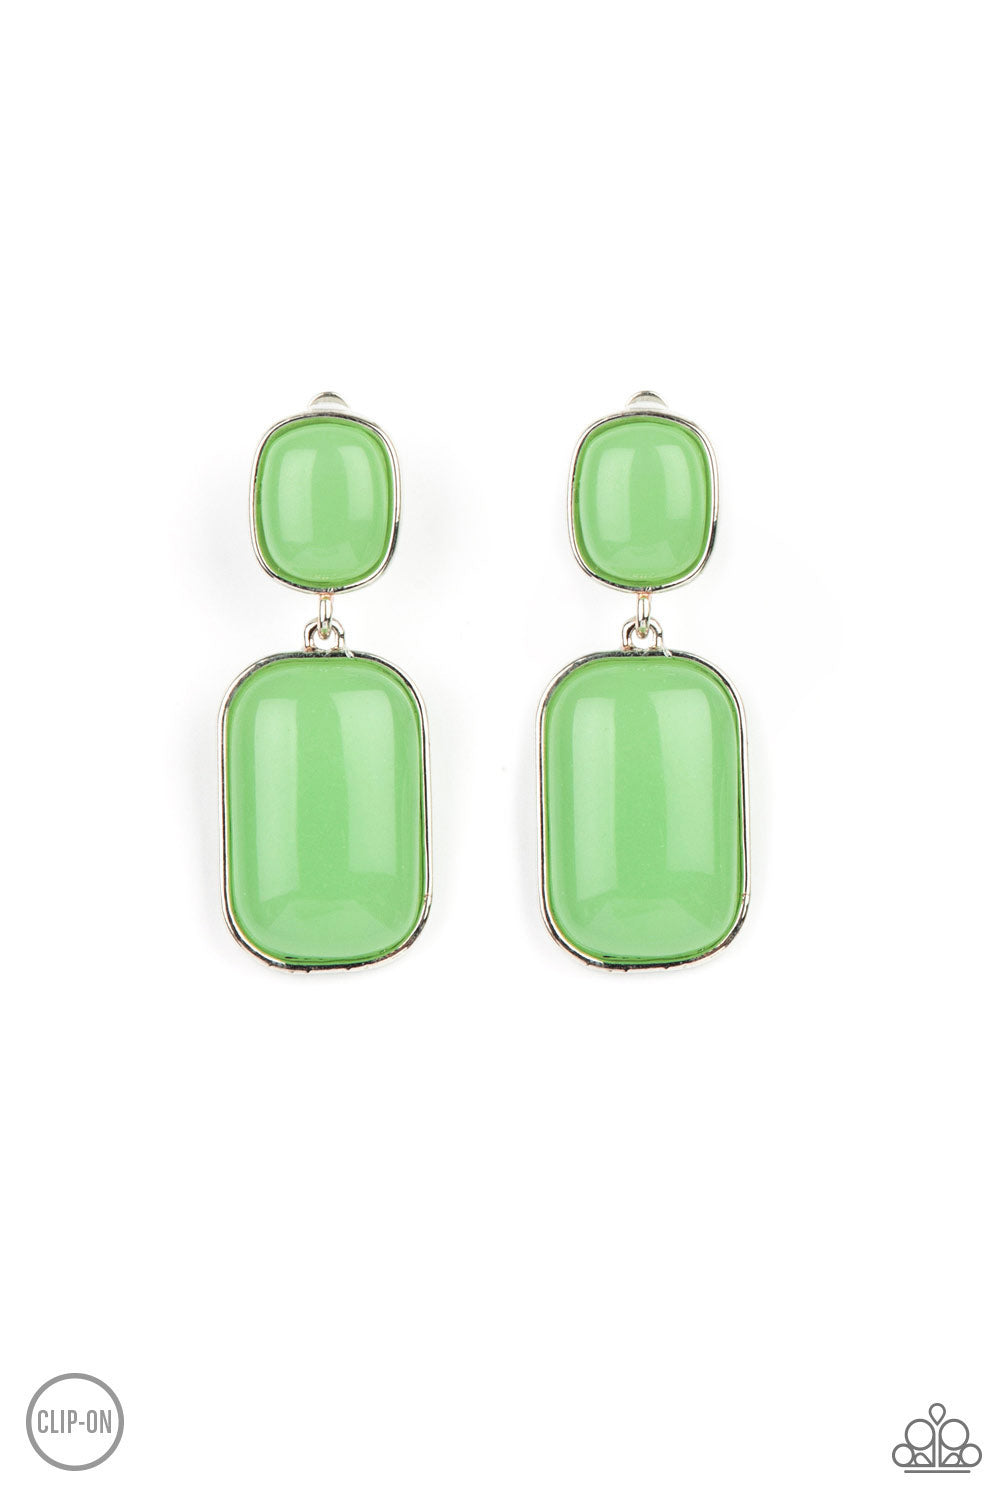 Meet Me At The Plaza - Green Clip On Earrings - Paparazzi Accessories